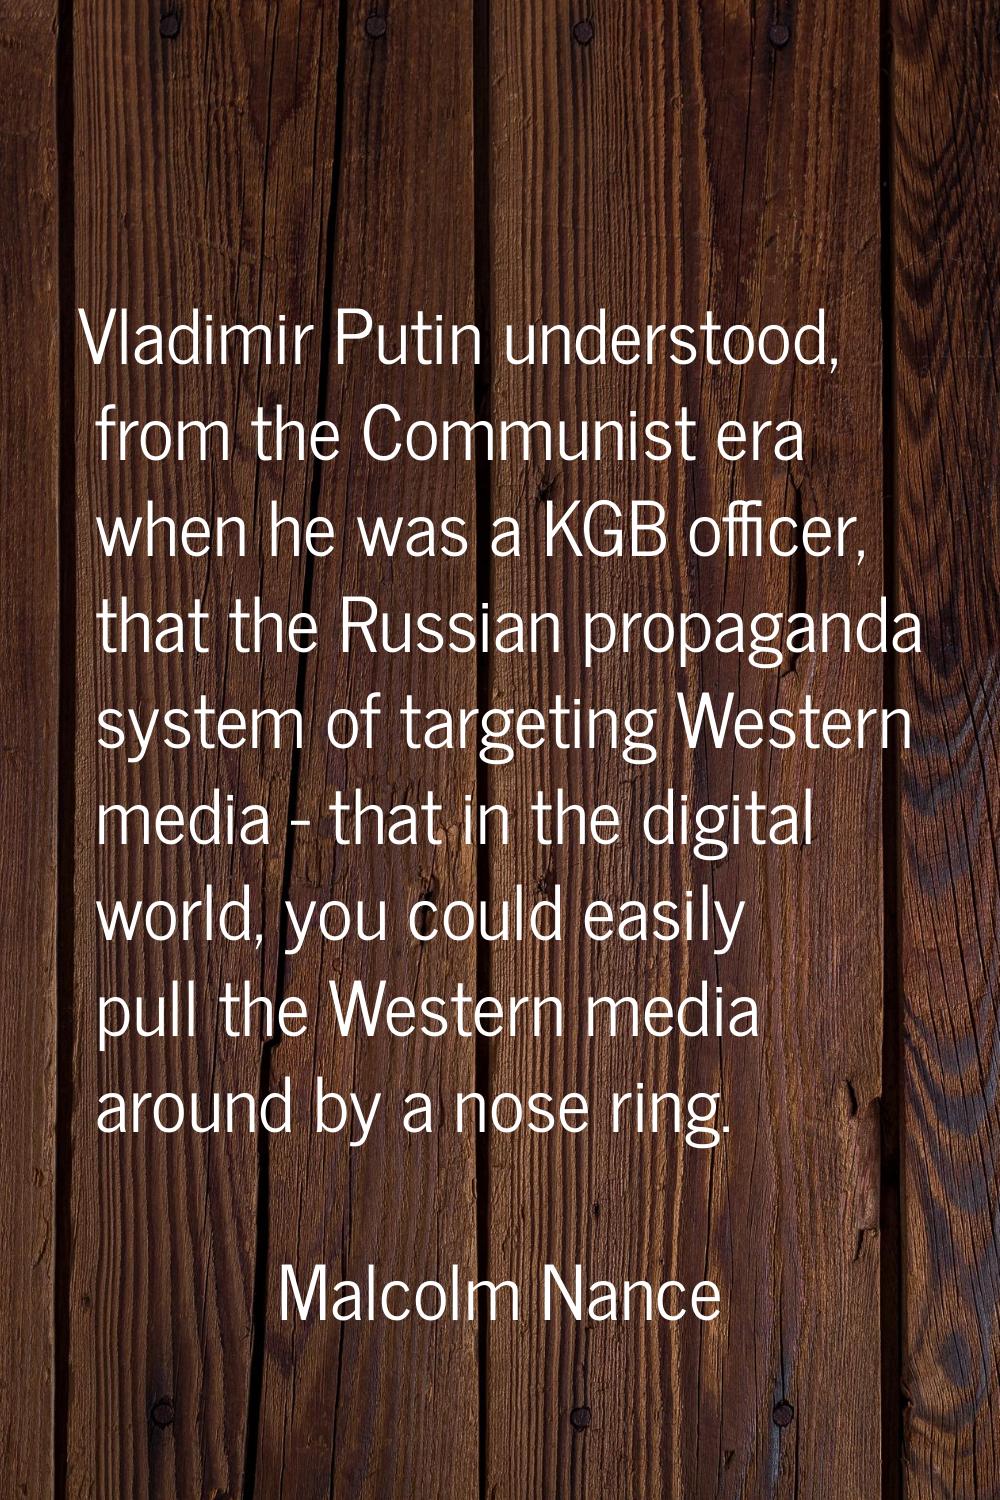 Vladimir Putin understood, from the Communist era when he was a KGB officer, that the Russian propa